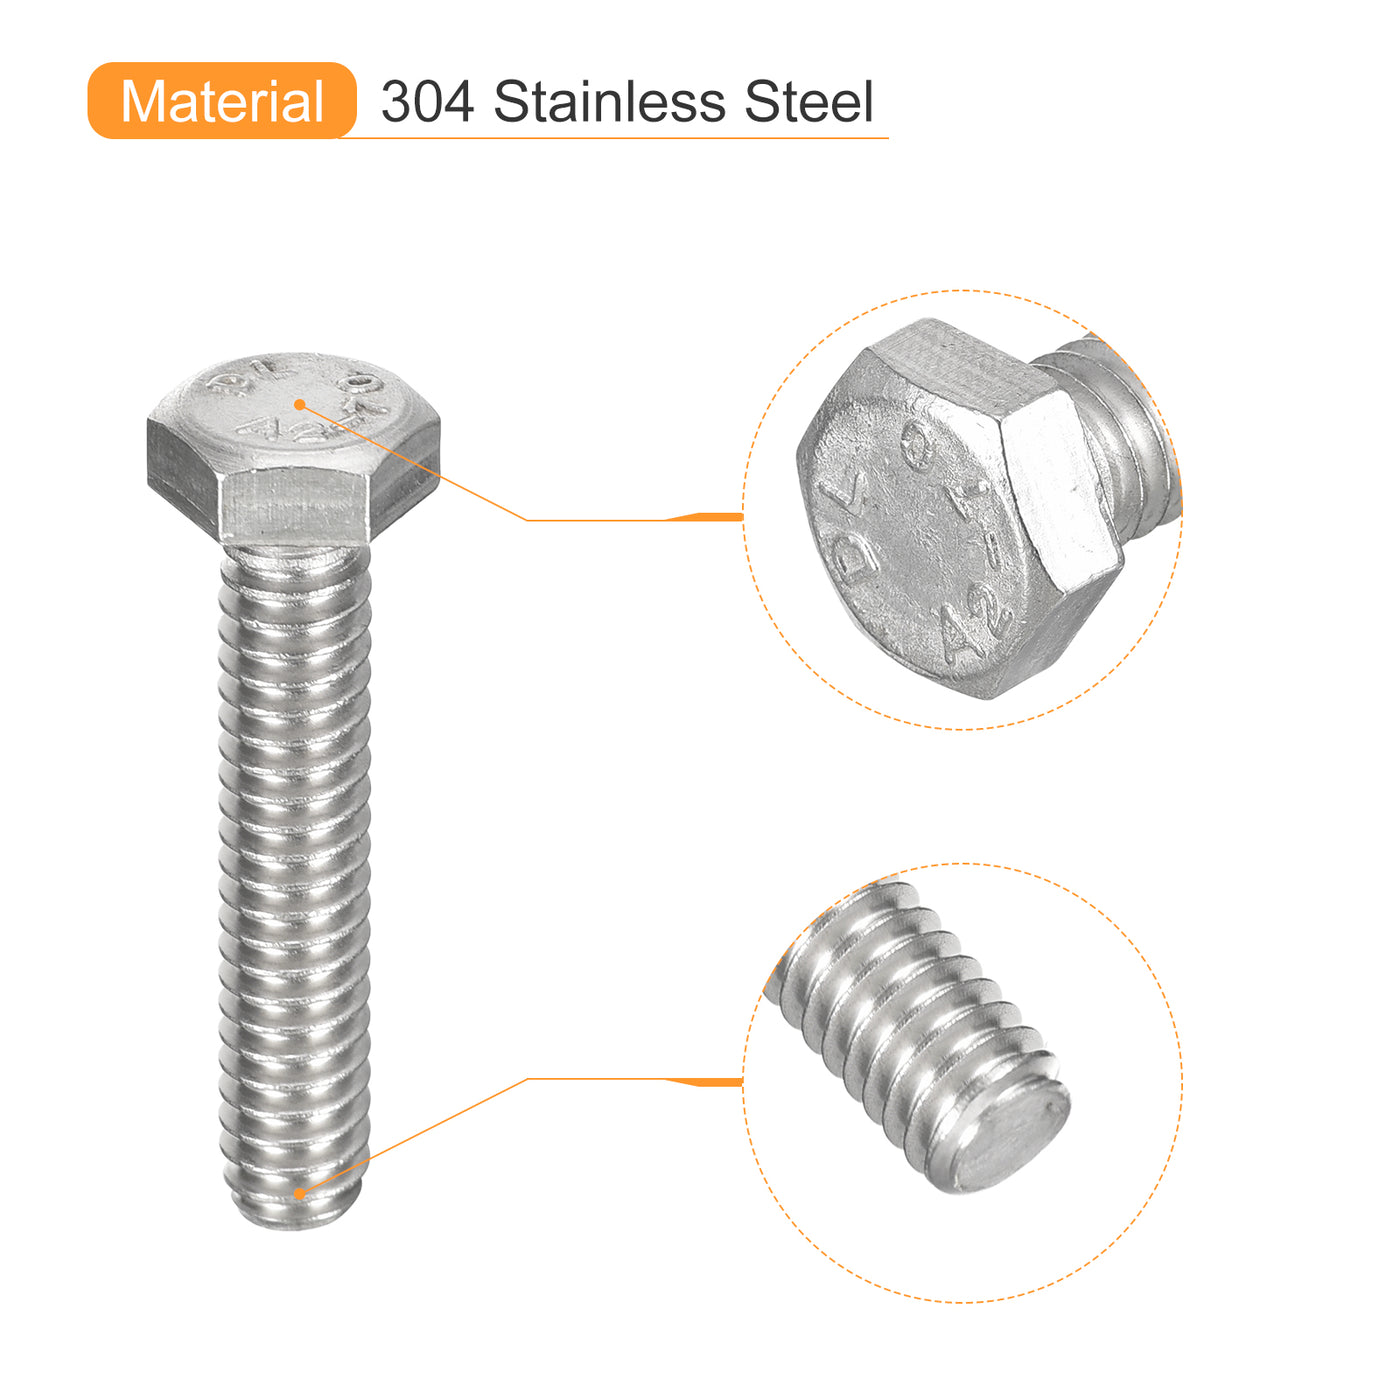 uxcell Uxcell Hex Head Bolts, 304 Stainless Steel Hexagon Bolt Fully Thread Machine Screw